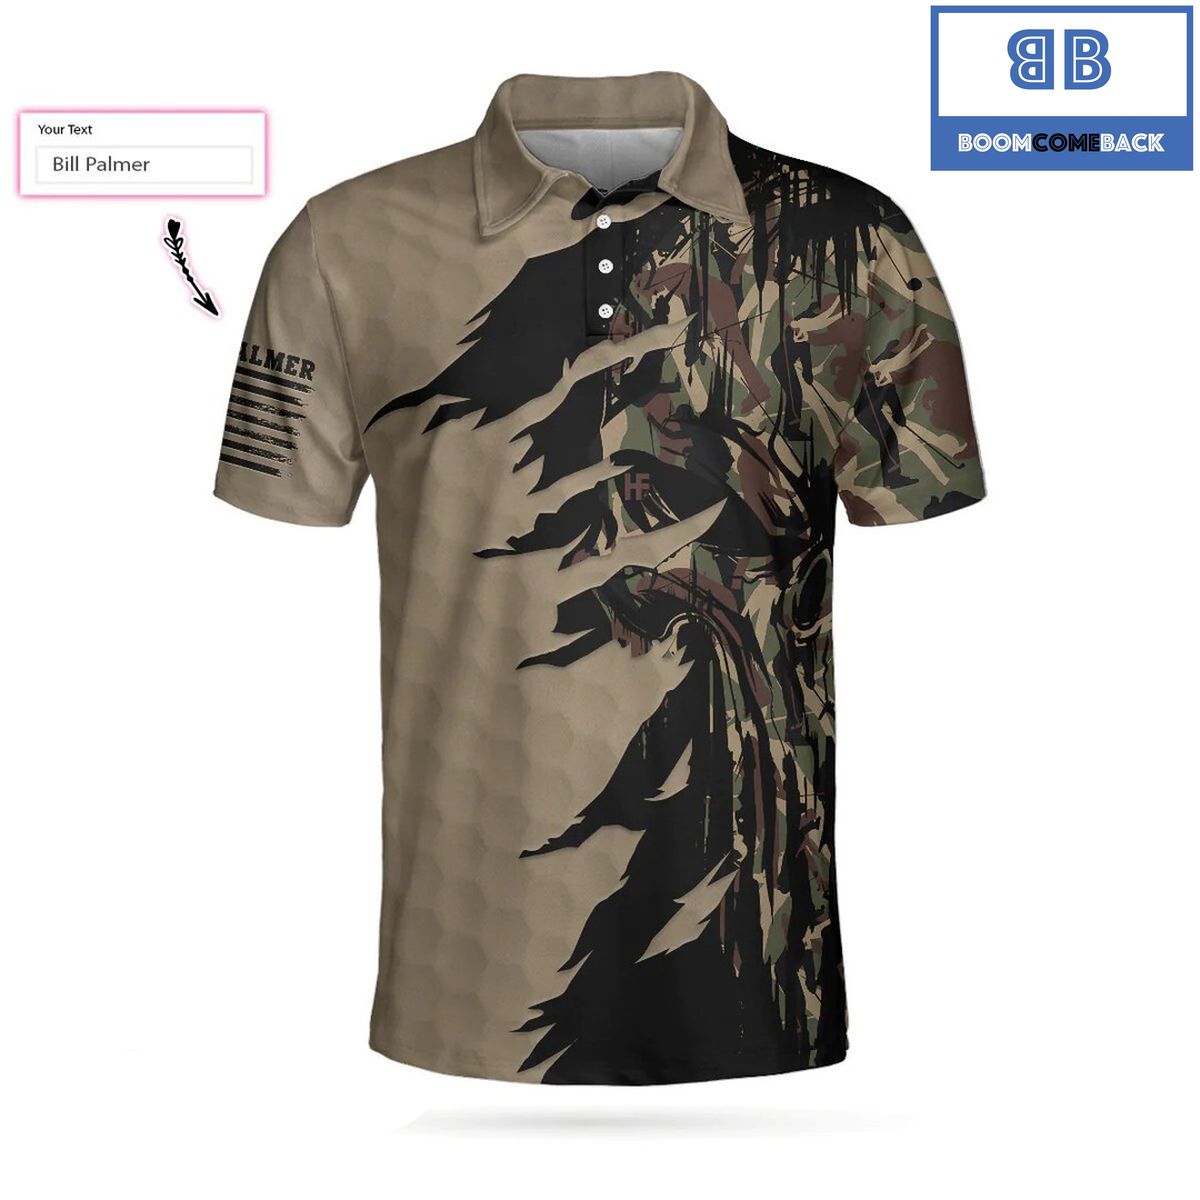 Personalized2BGolf2BRipped2BVintage2BGolfing2BClubs2BCamouflaged2BAthletic2BCollared2BMens2BPolo2BShirt2B3 tg1mh